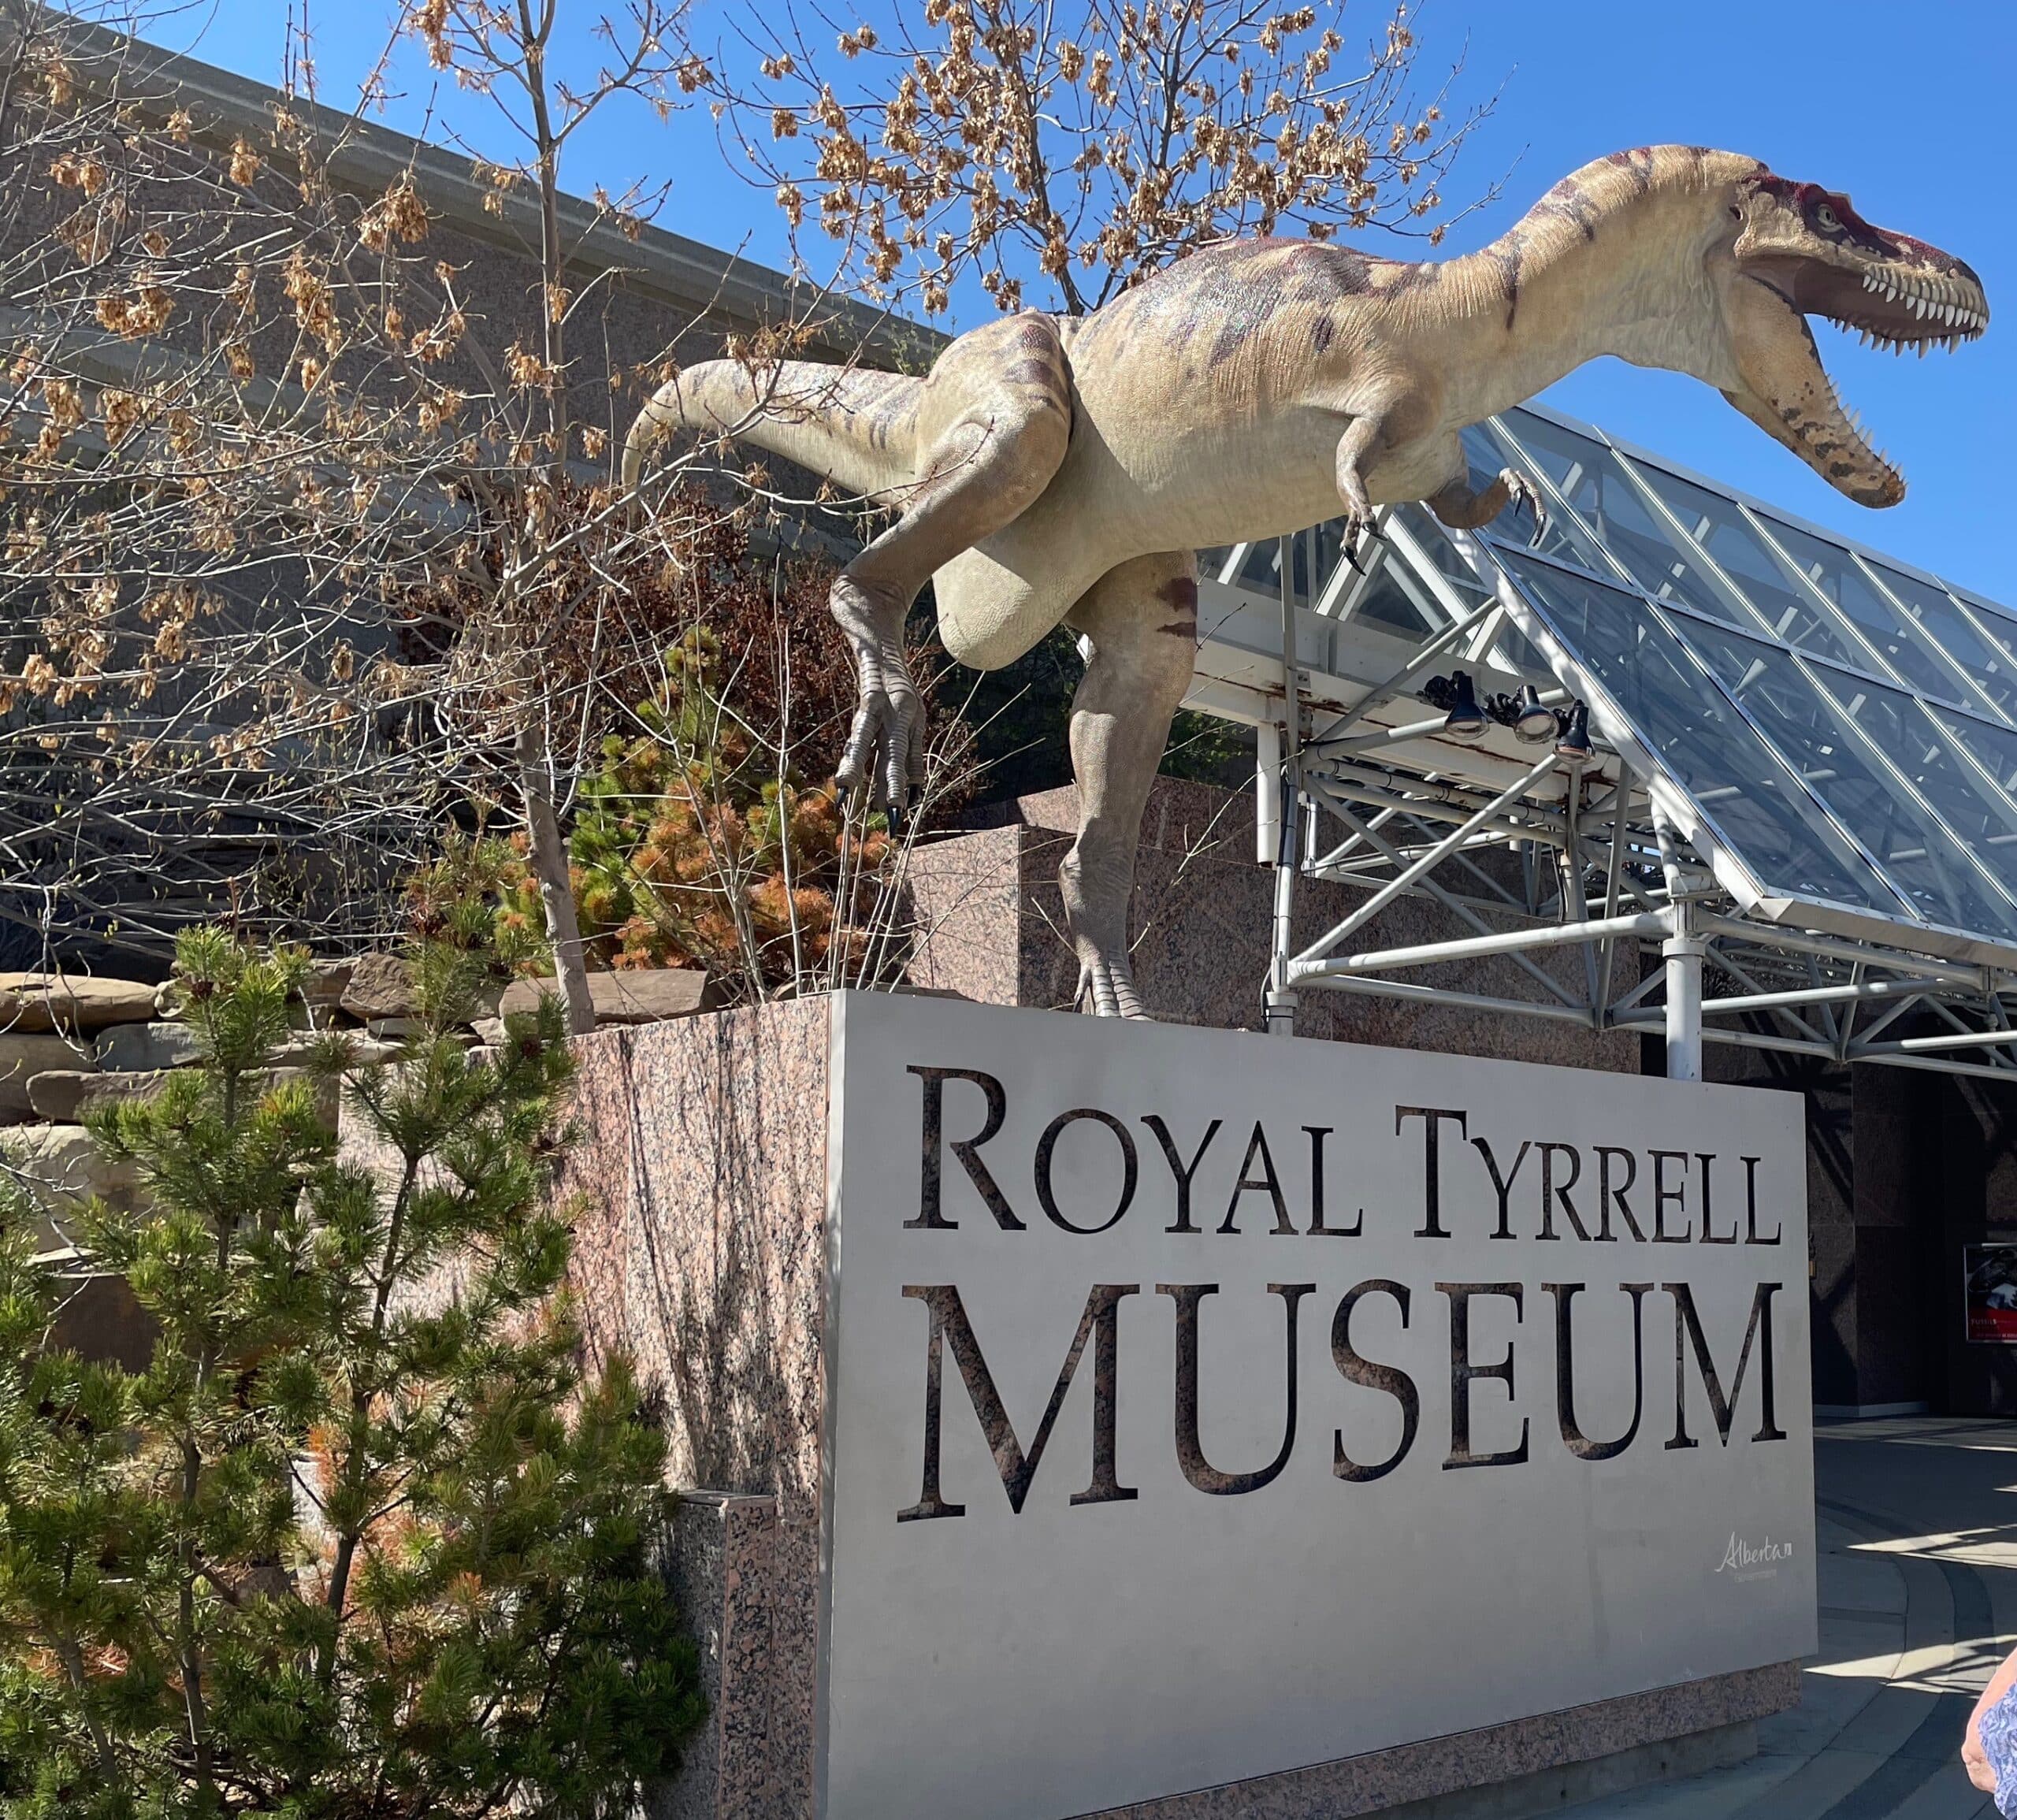 Royal Tyrrell Museum T-Rex at the entrance